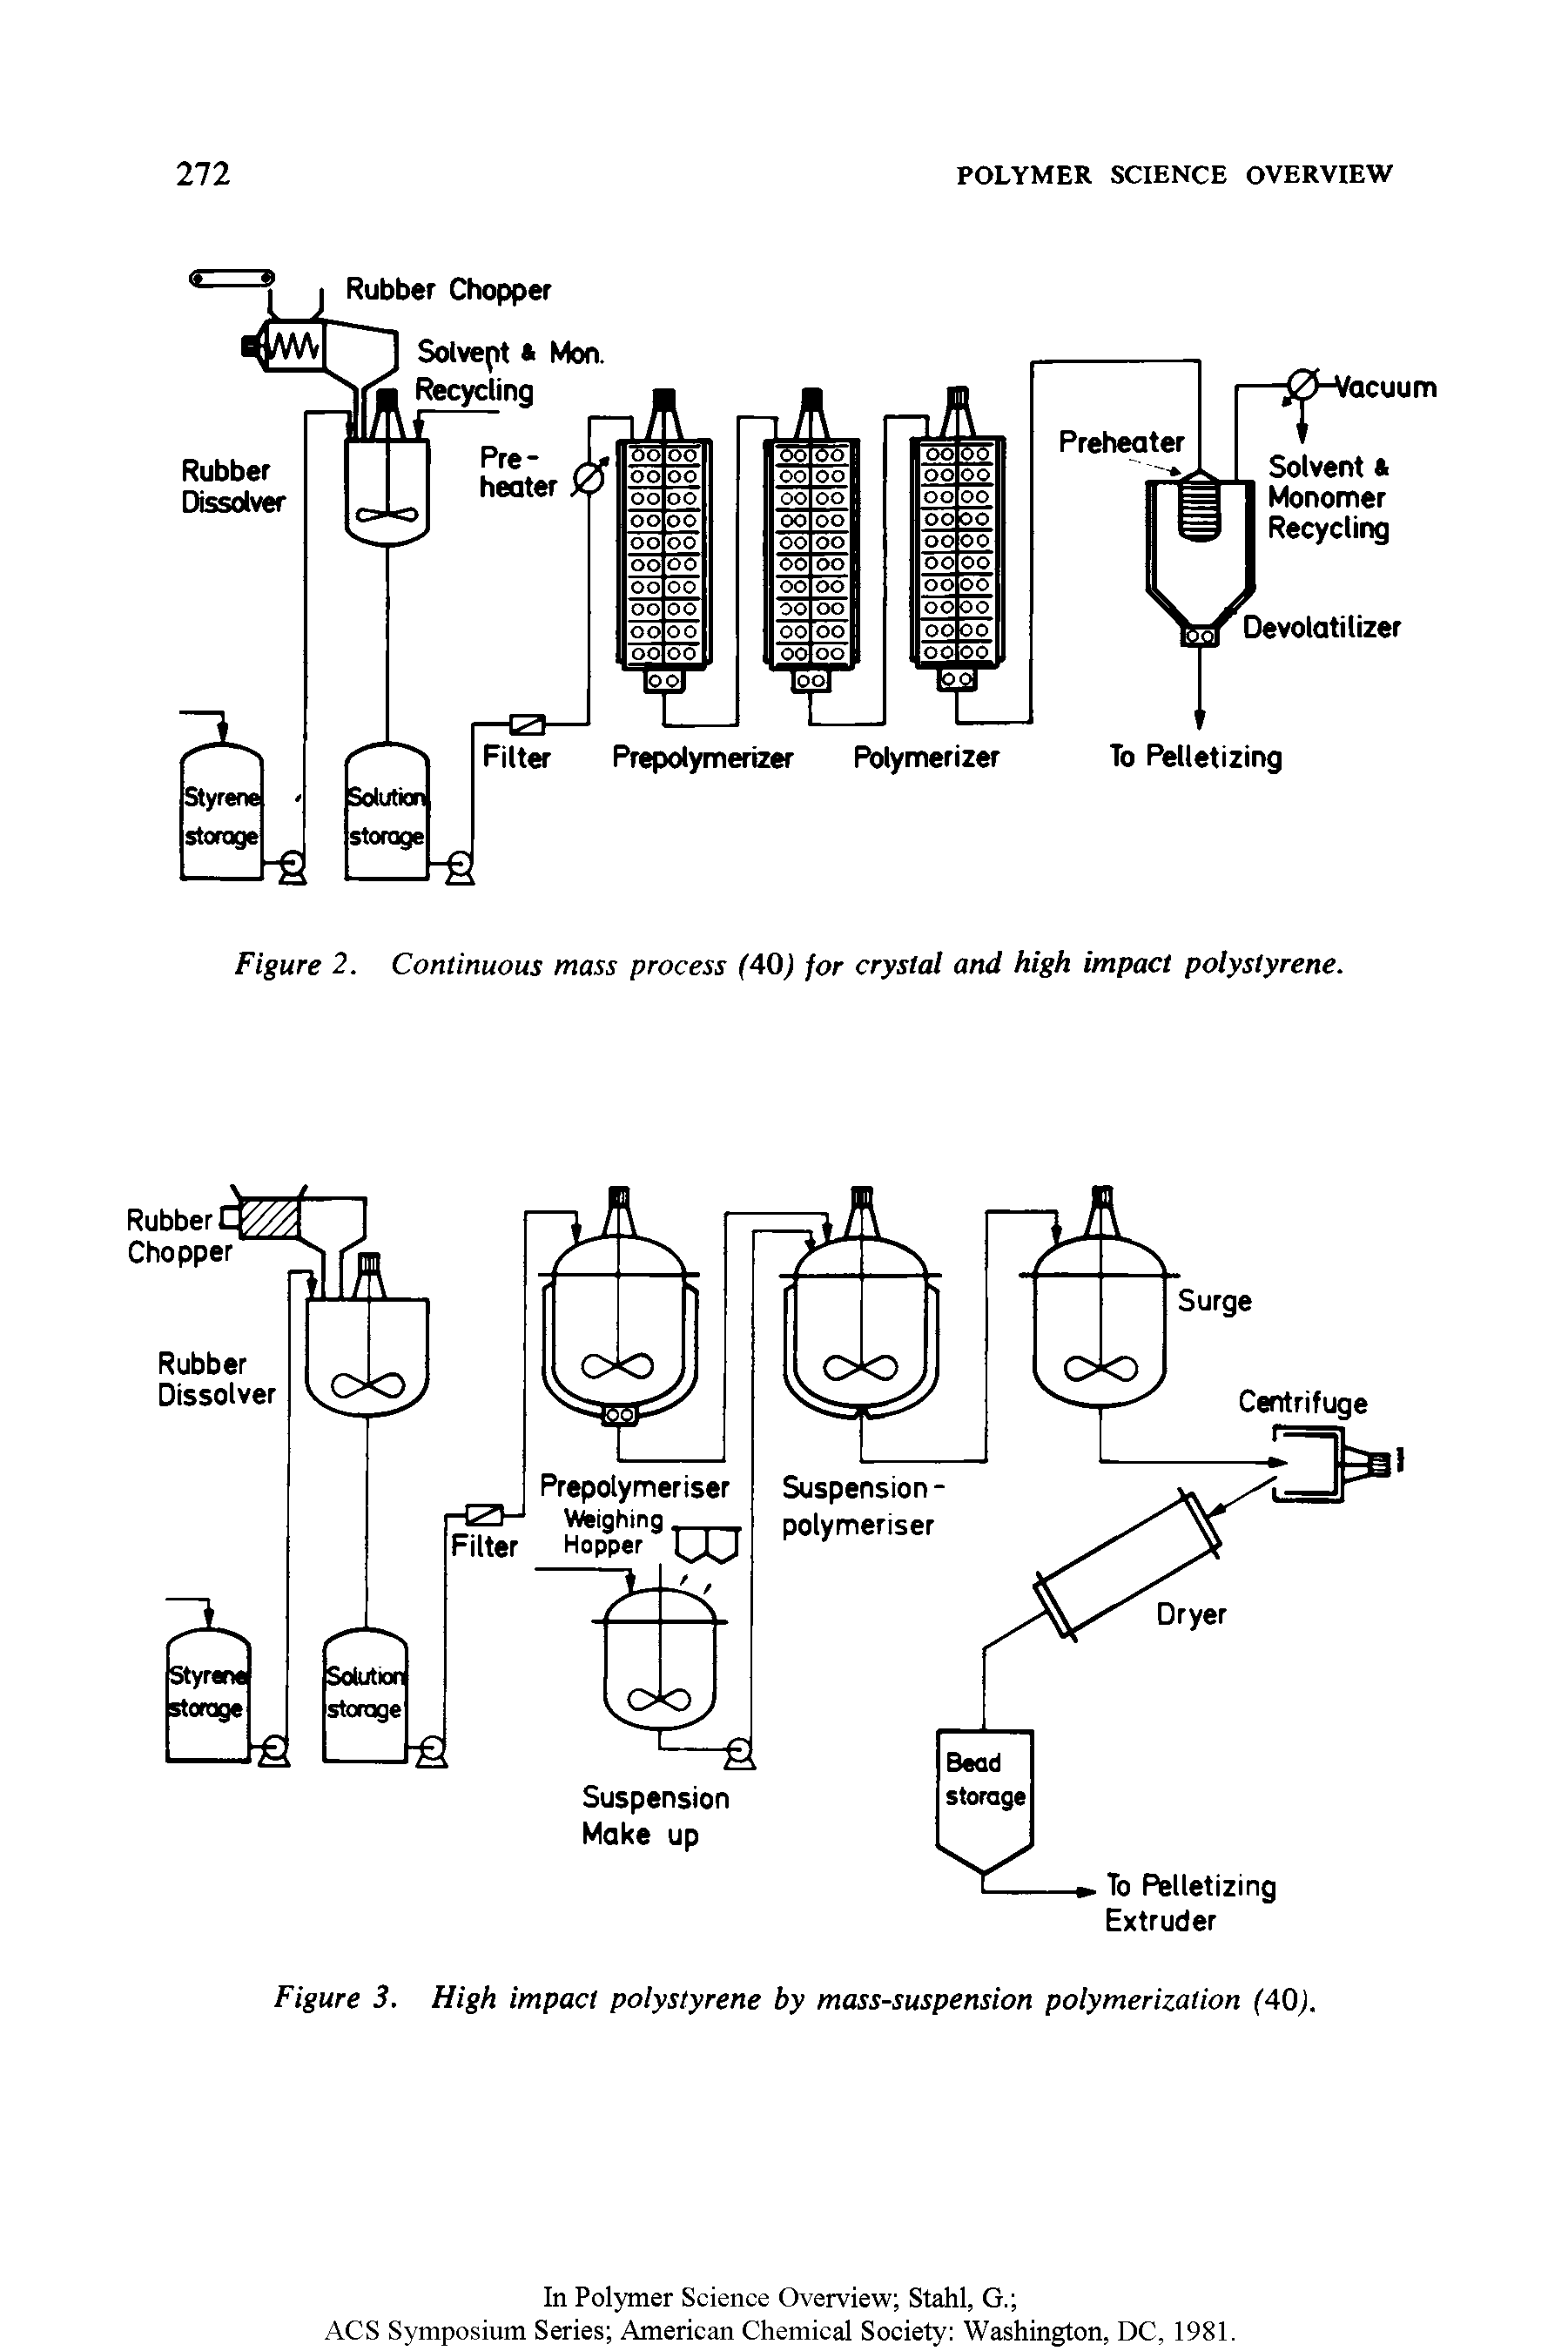 Figure 2. Continuous mass process (40) for crystal and high impact polystyrene.